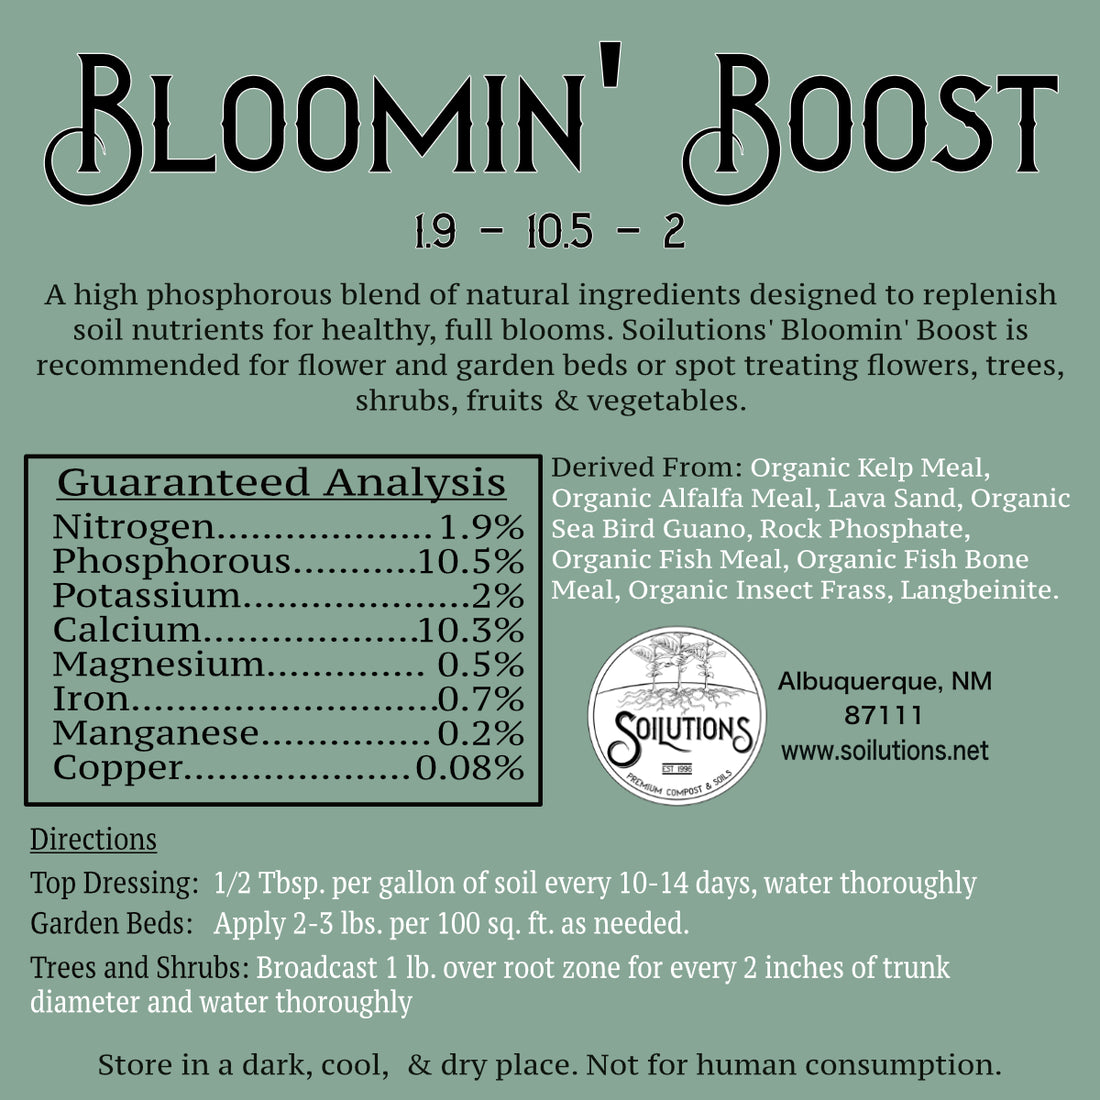 Blooming Boost